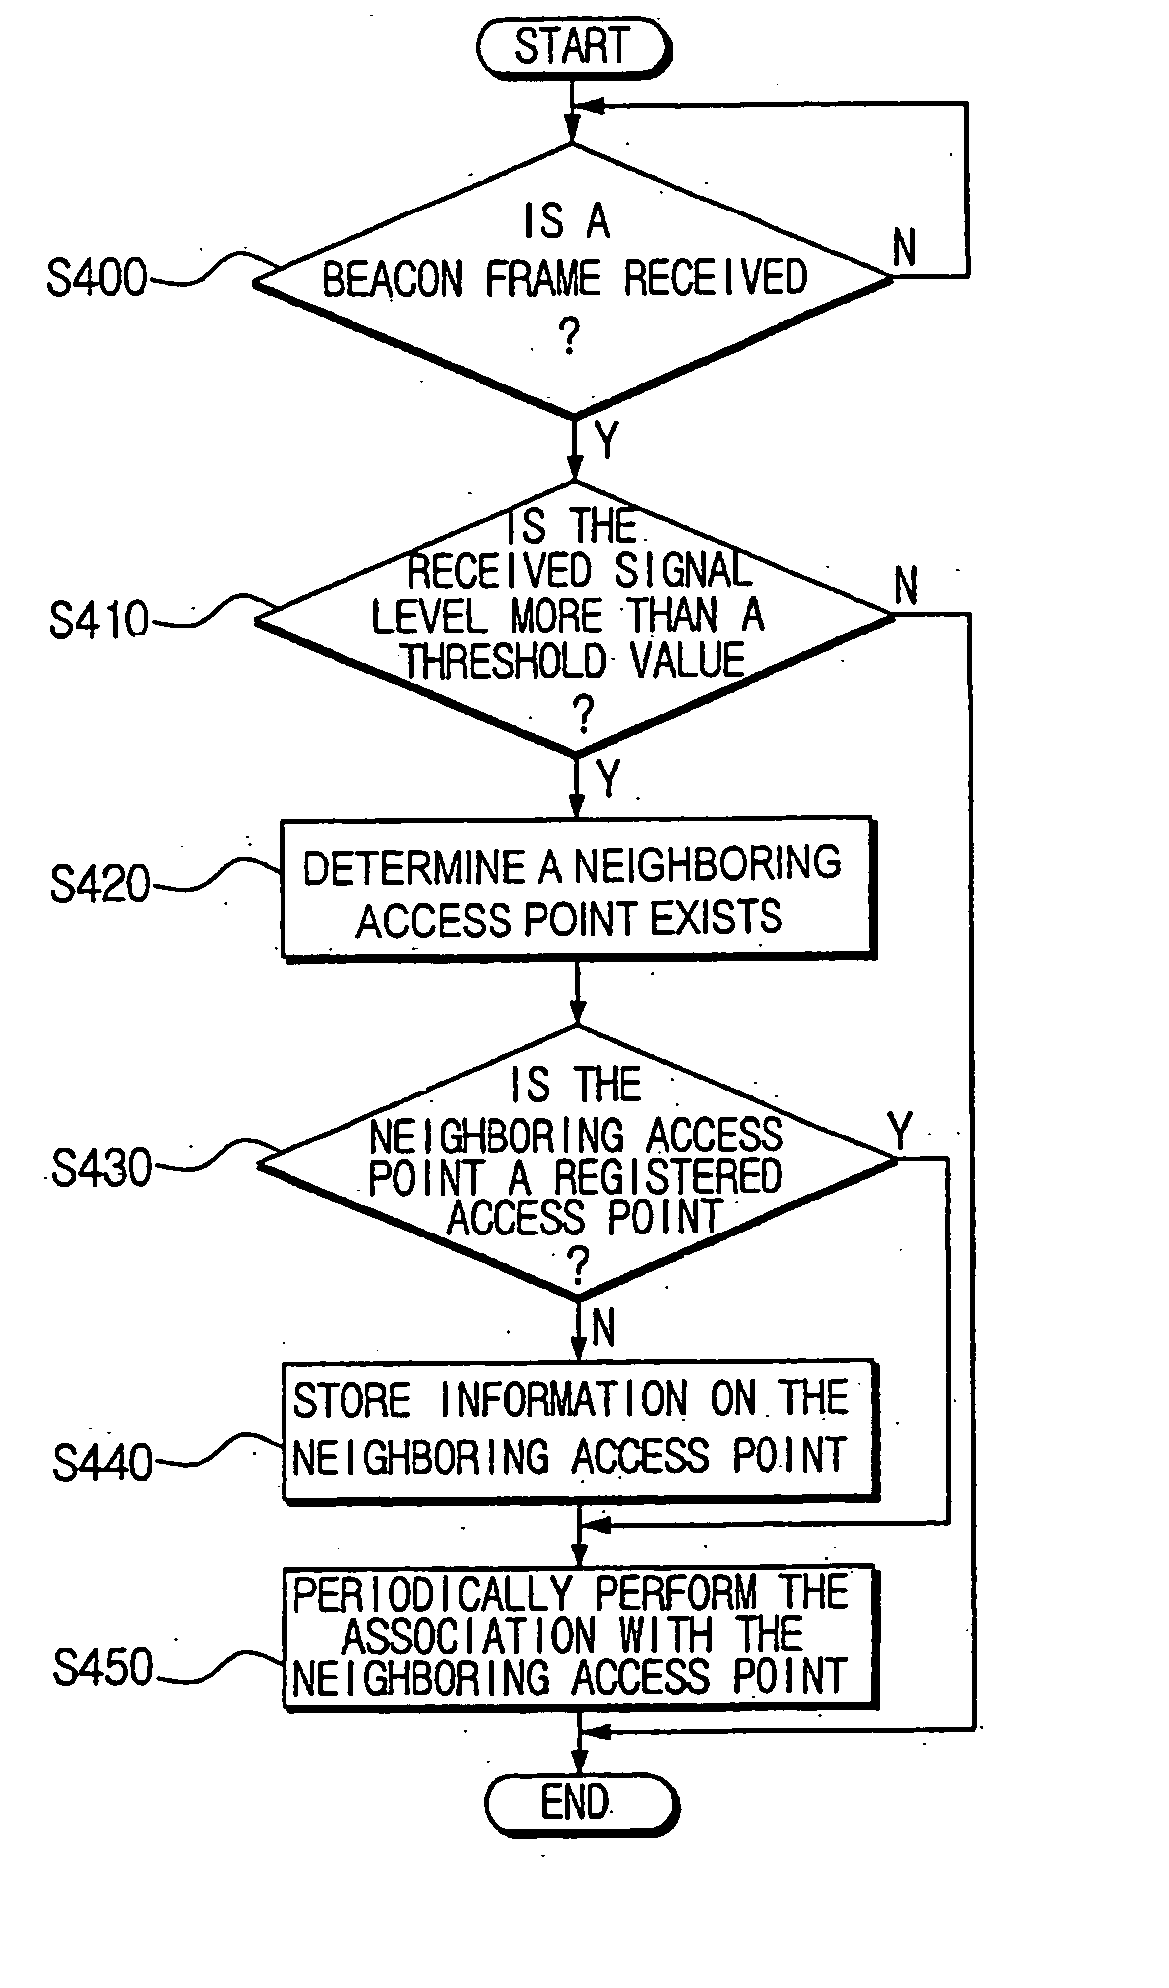 Communication system and method in wireless infrastructure network environments